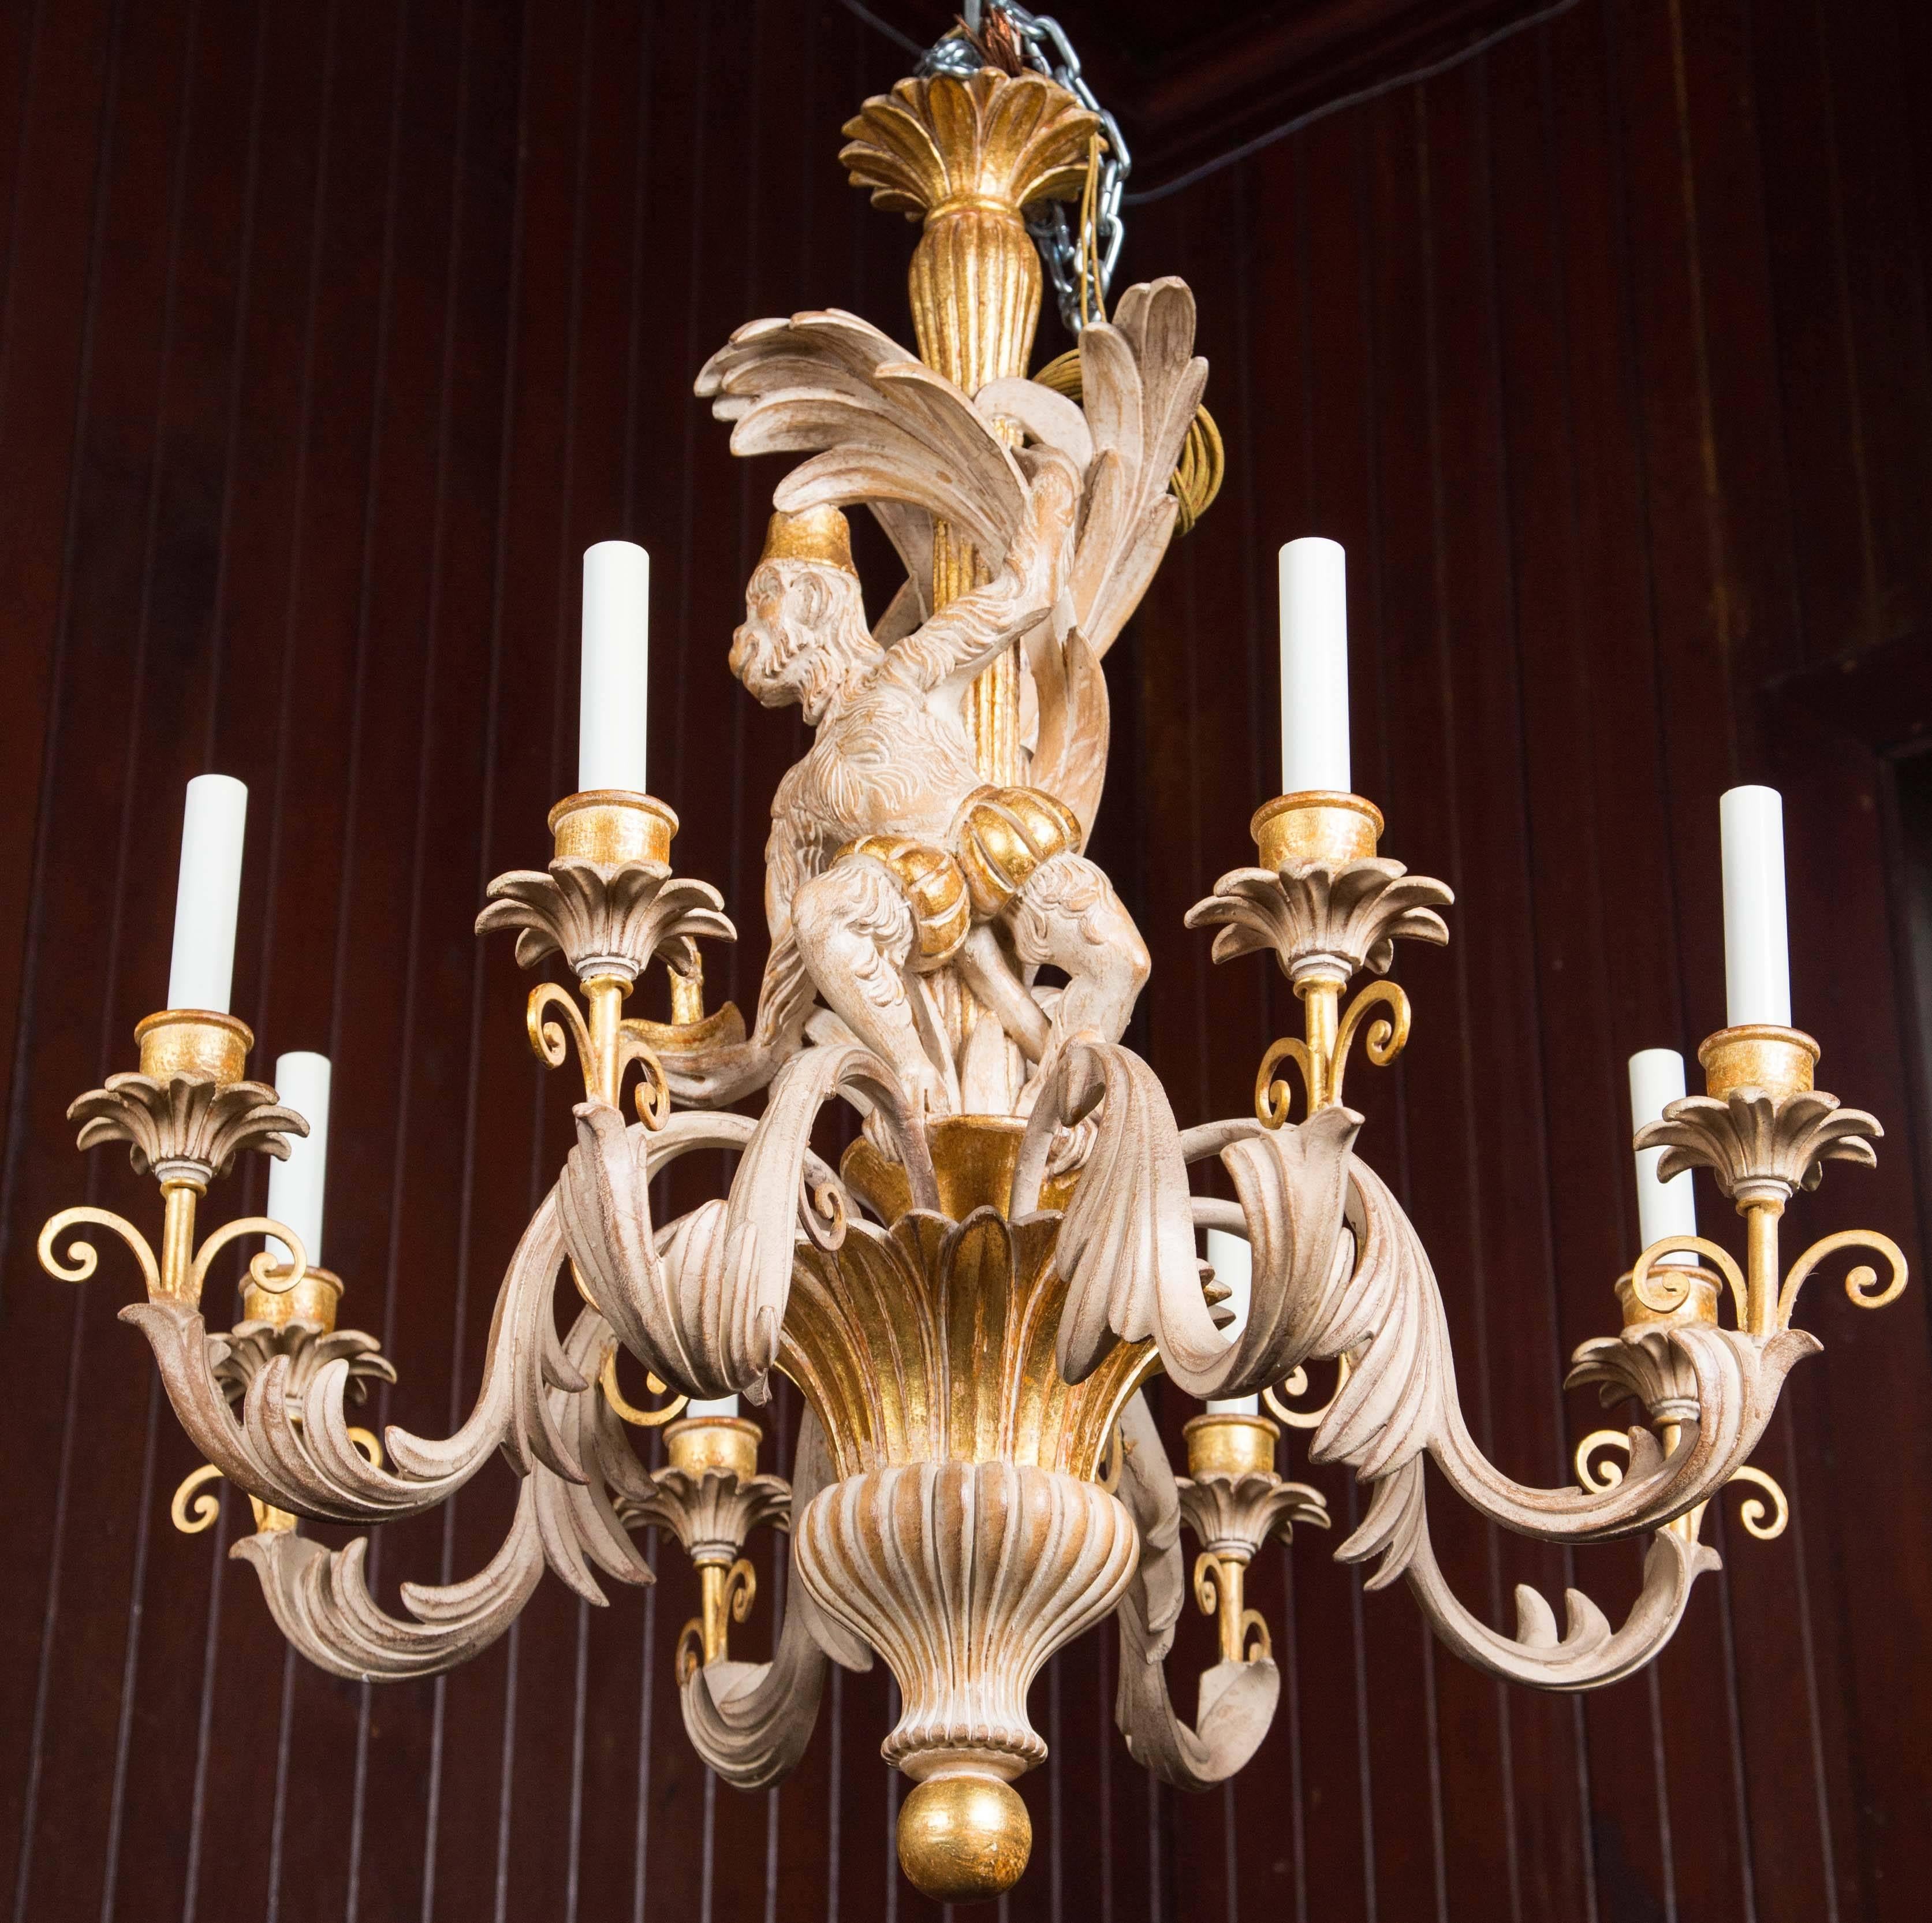 Italian carved, solid wood Monkey chandelier, light finish with gilding eight lights.
New-old stock from 1970s.